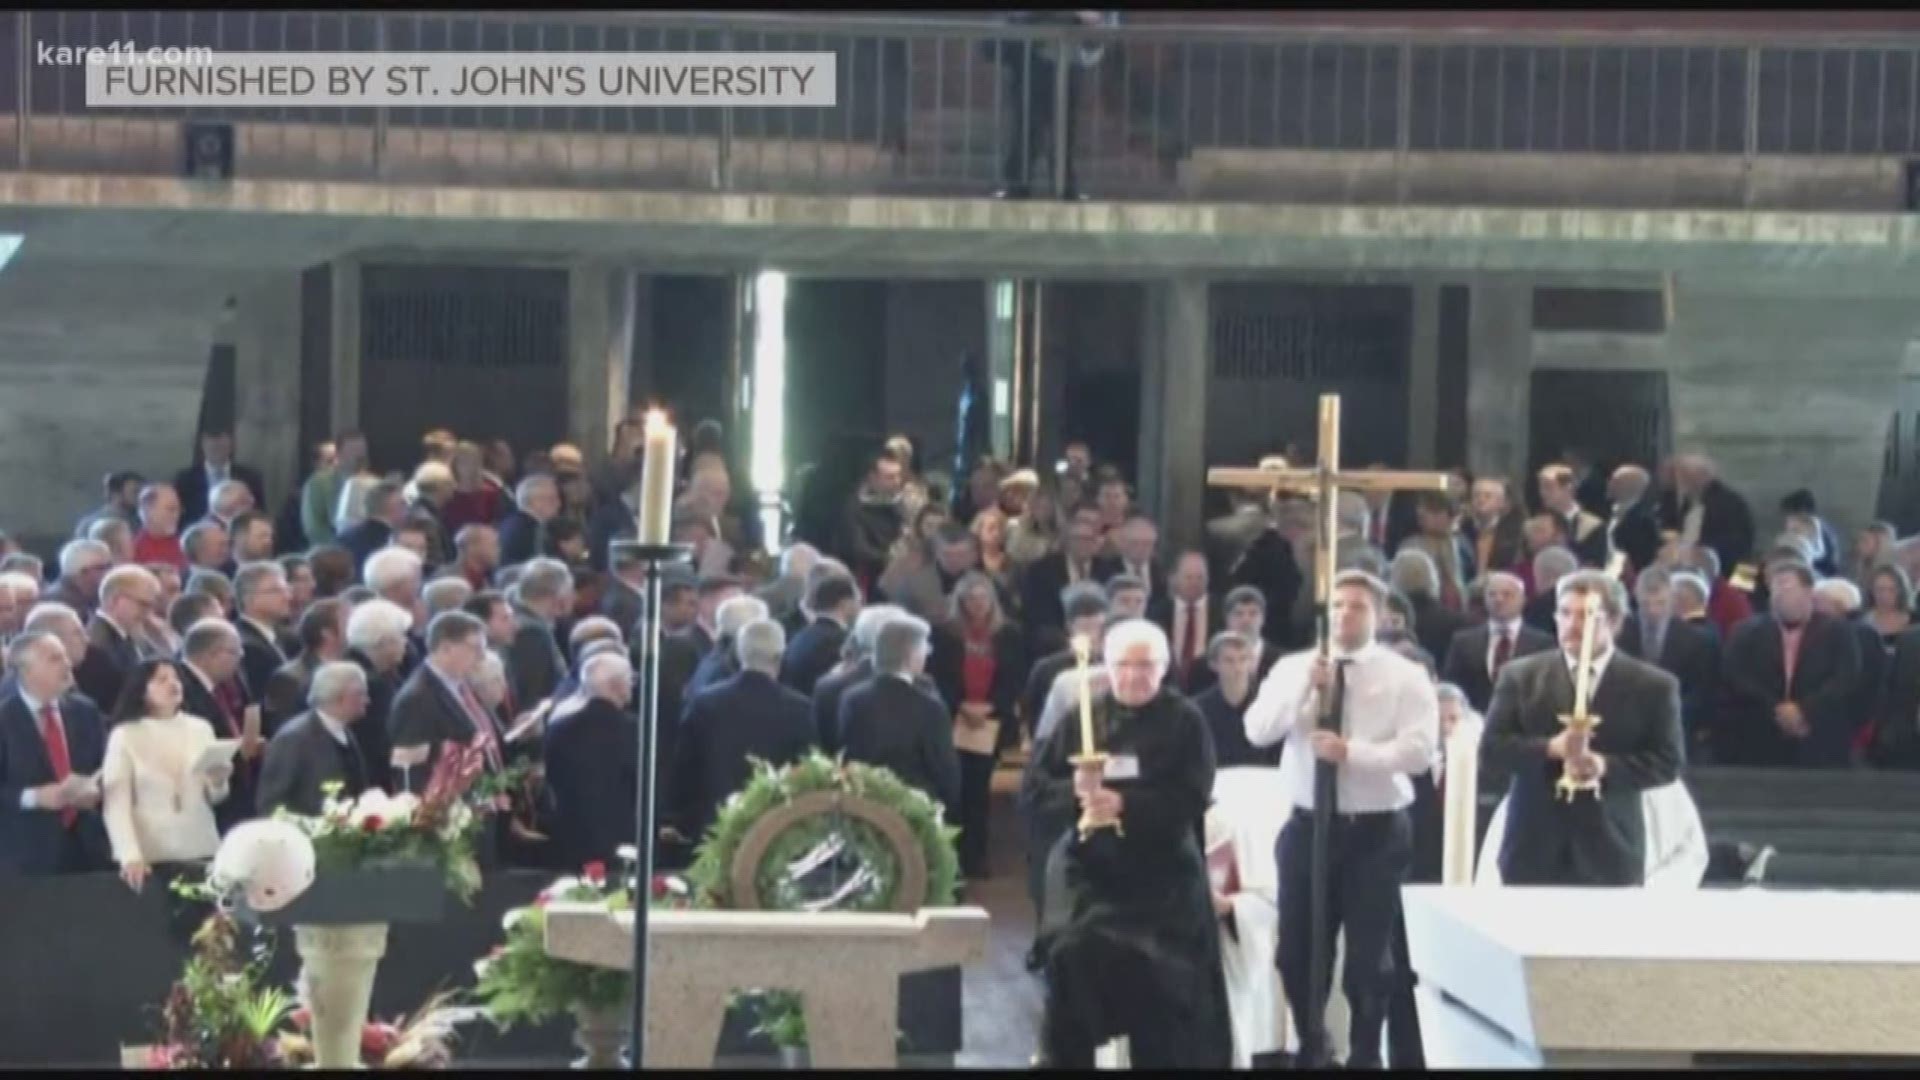 Minnesotans, former players and college football fans from across the nation streamed into Collegeville Monday morning to pay final respects to legendary St. John's University football coach John Gagliardi. https://kare11.tv/2QRiIZo